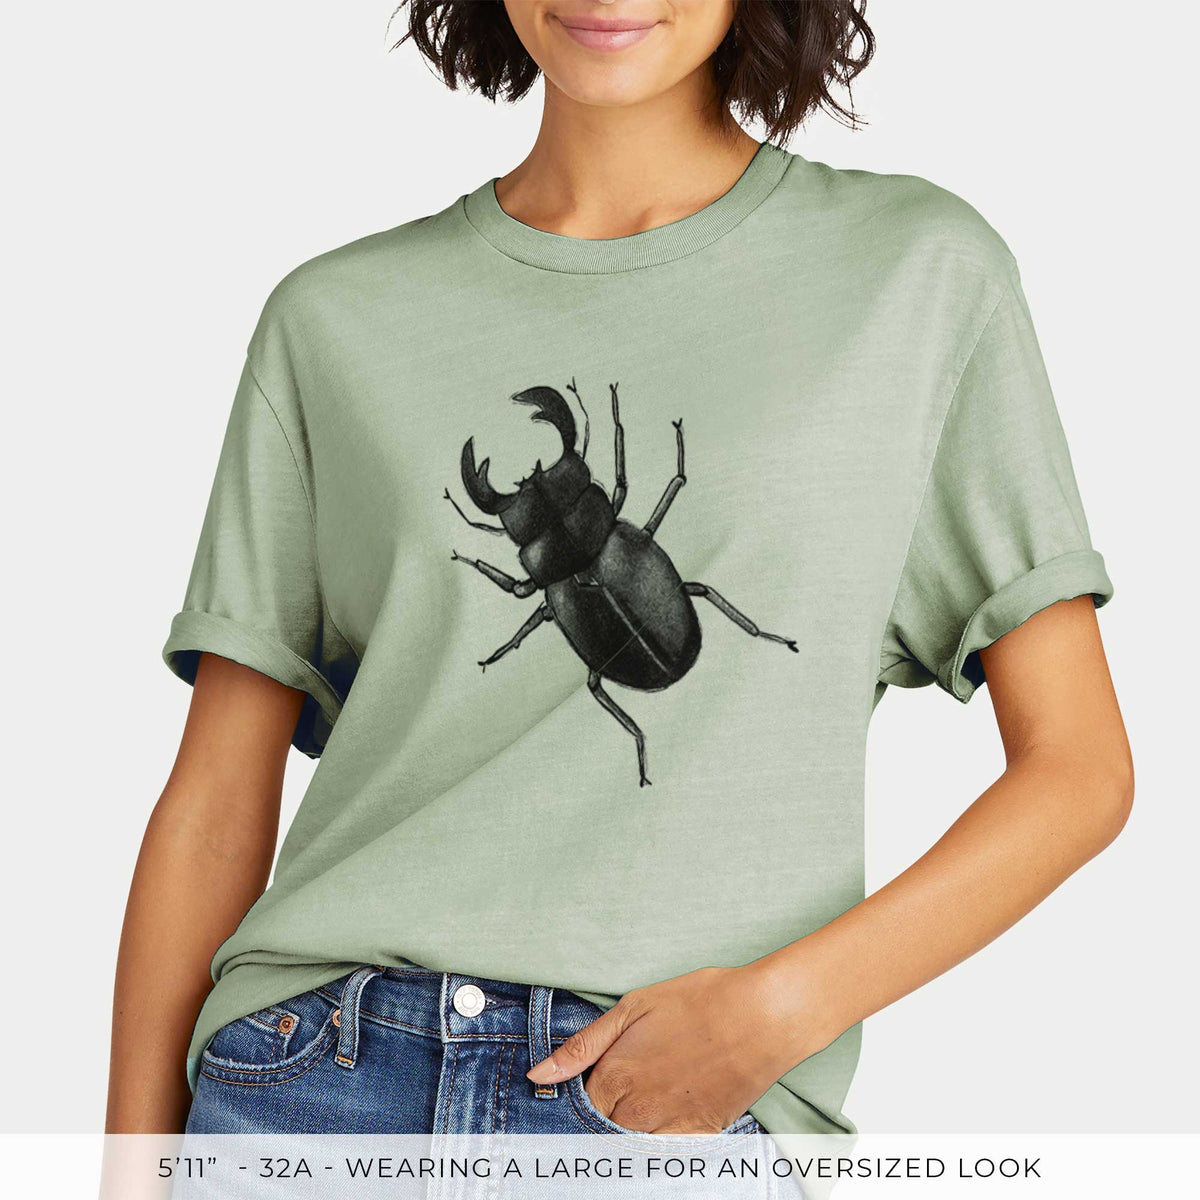 Dorcus titanus - Giant Stag Beetle -  Mineral Wash 100% Organic Cotton Short Sleeve